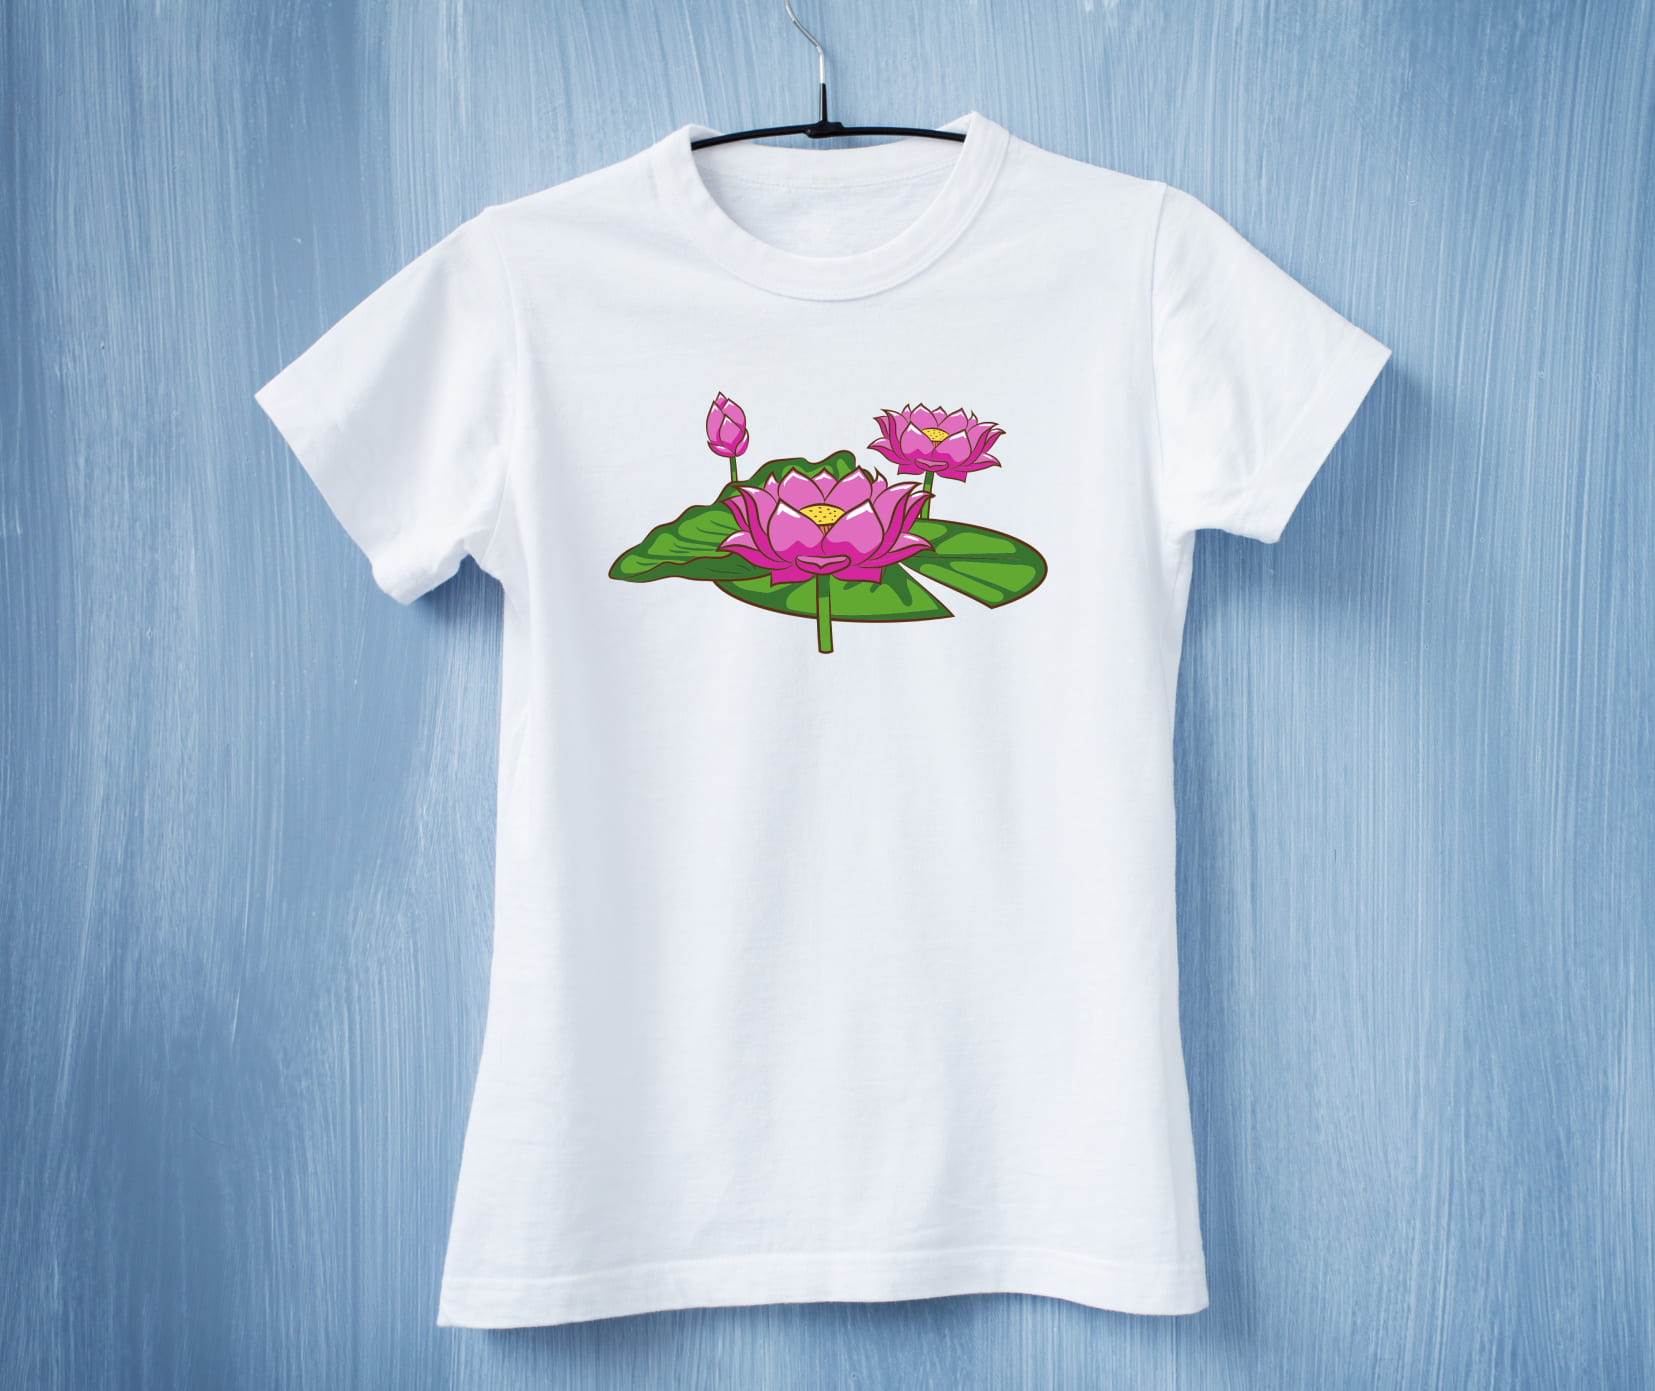 Some beautiful lotuses on the white t-shirt.